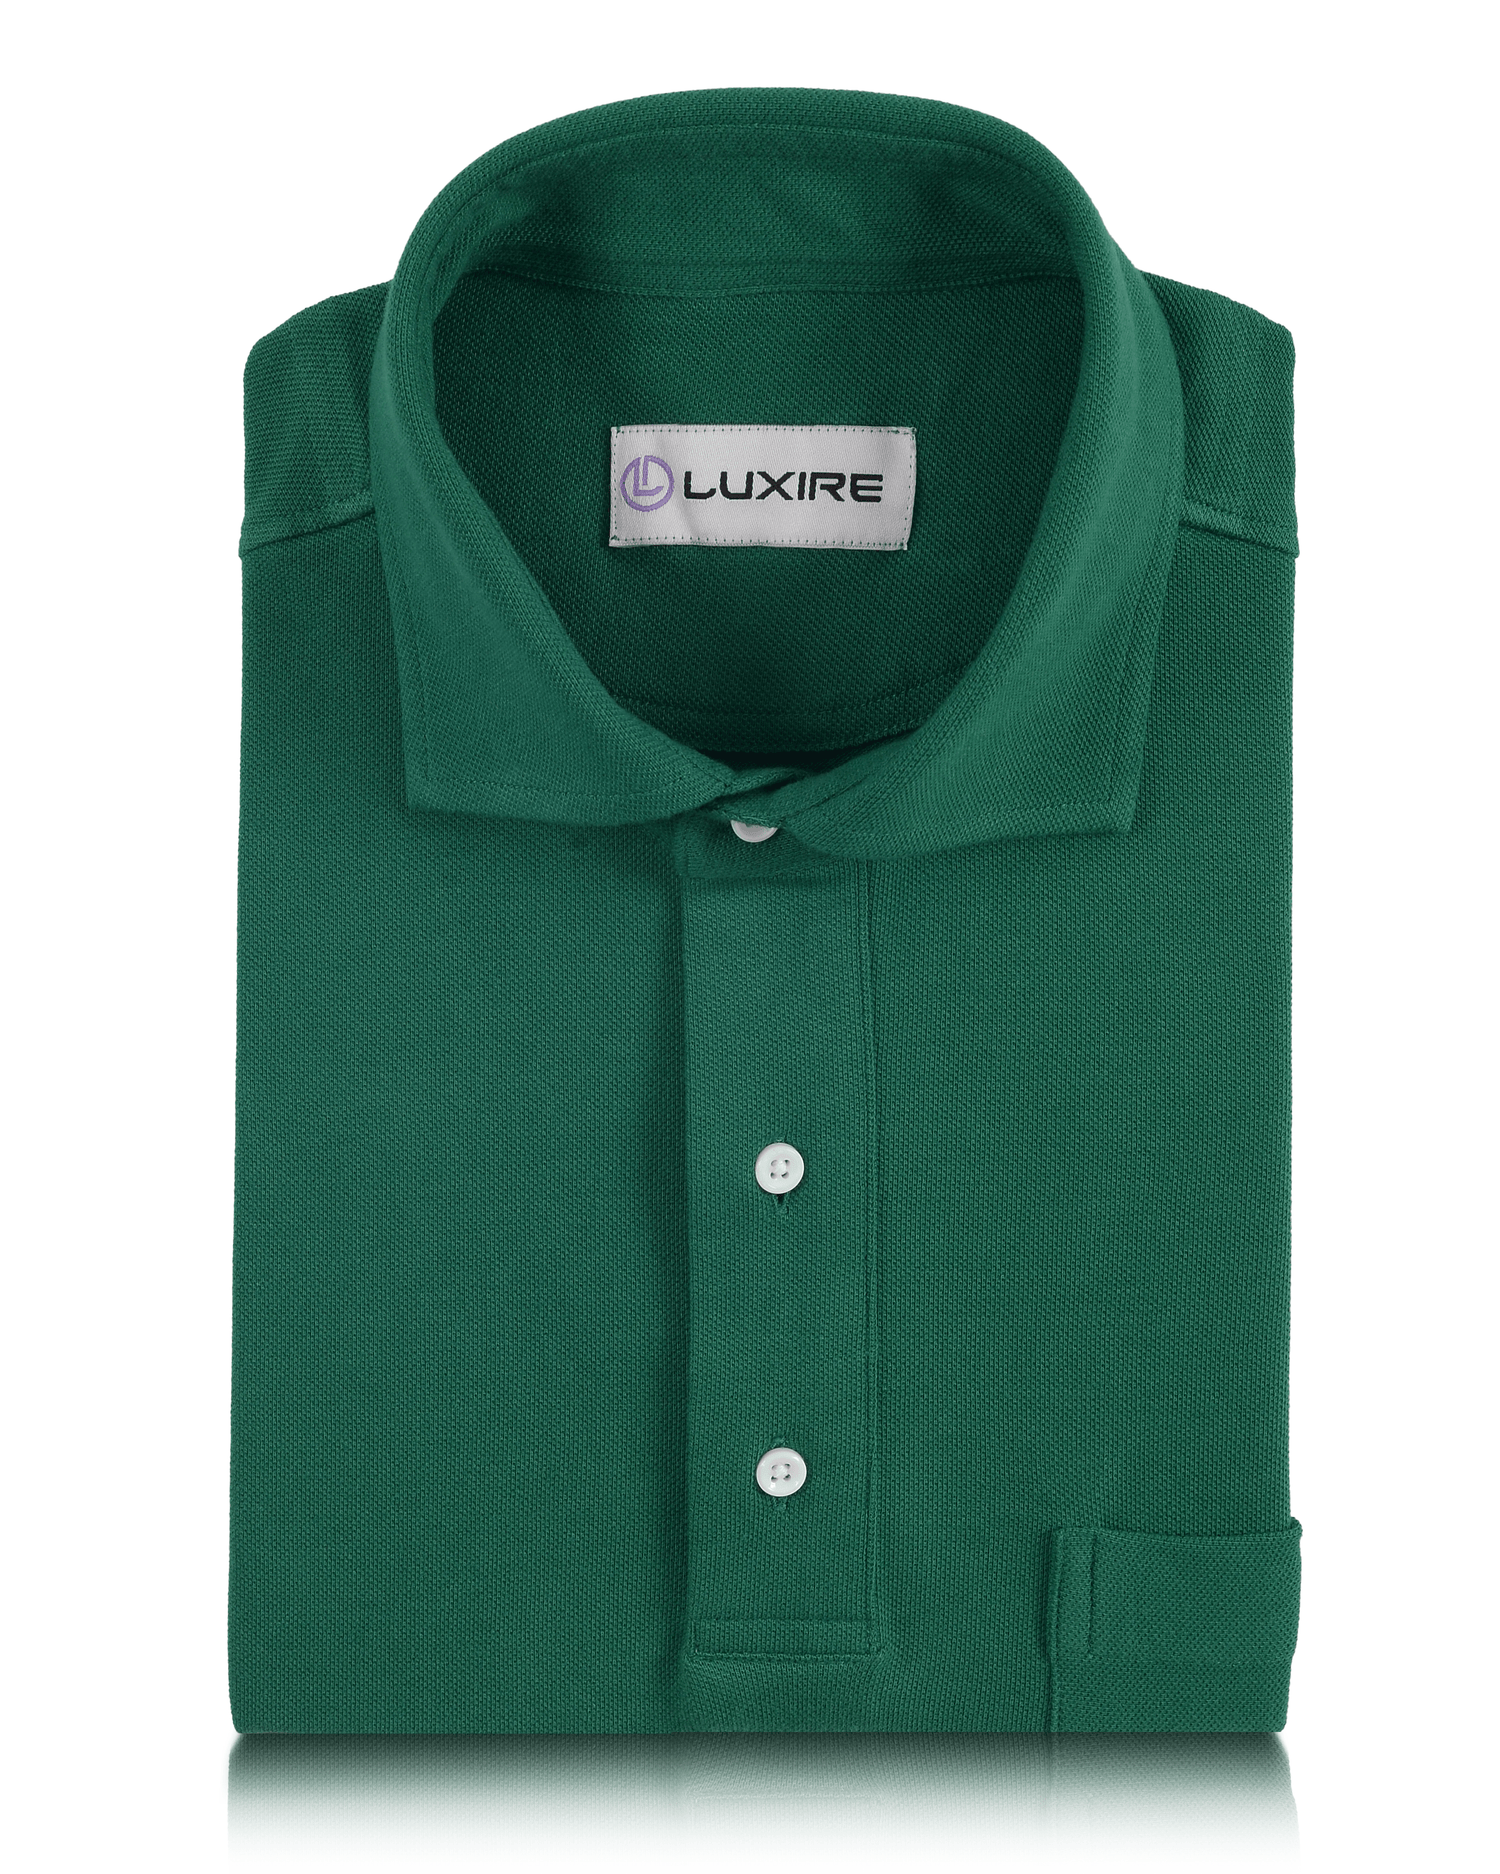 Front of the custom oxford polo shirt for men by Luxire in racing green